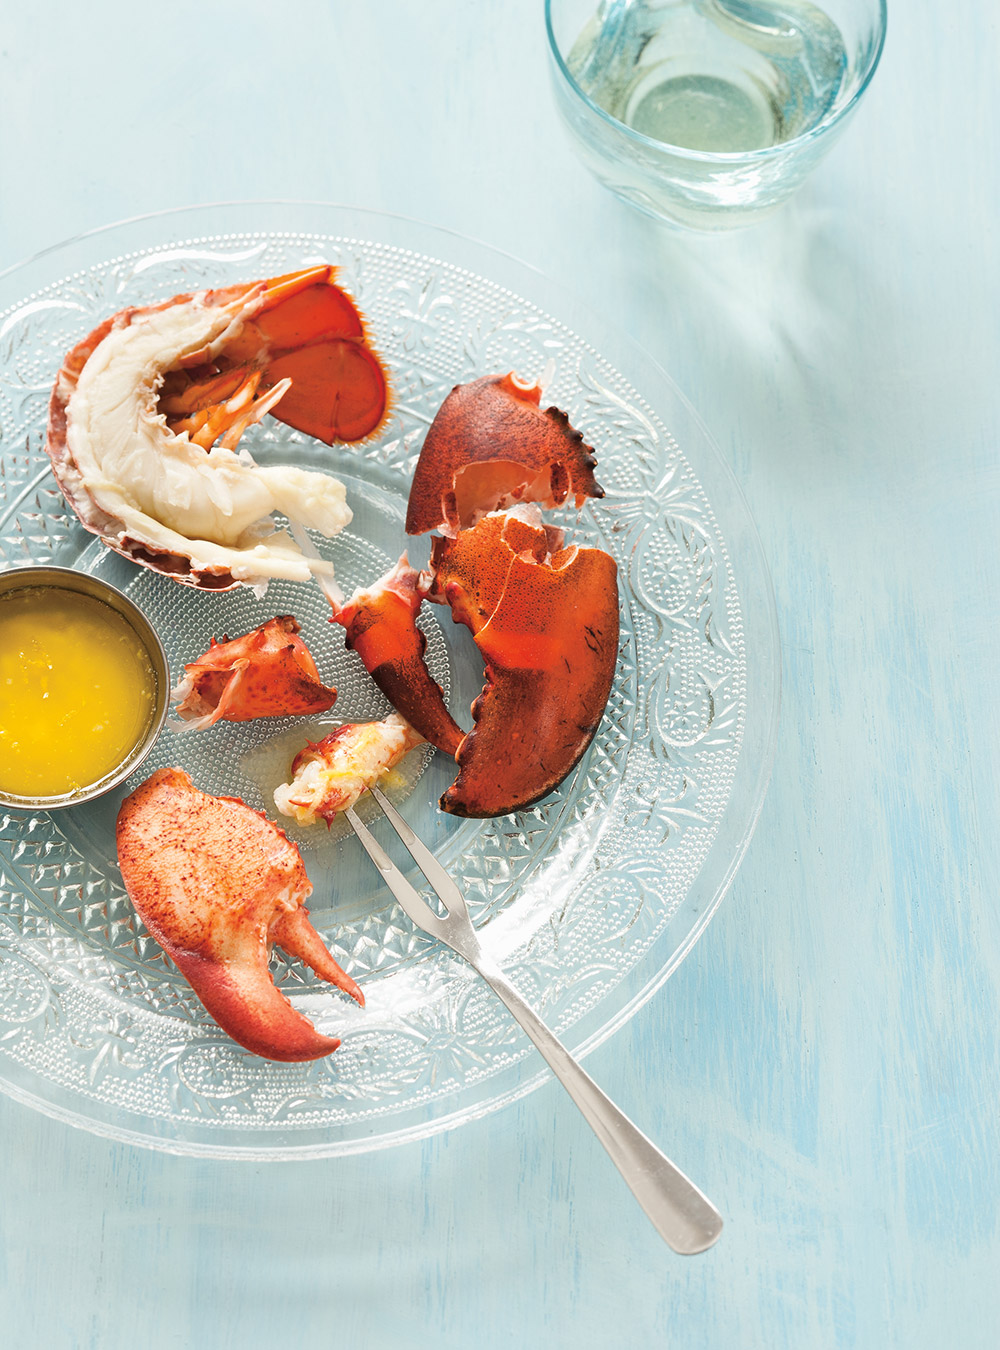 Steamed Lobster with Garlic Flower and Lemon Butter 